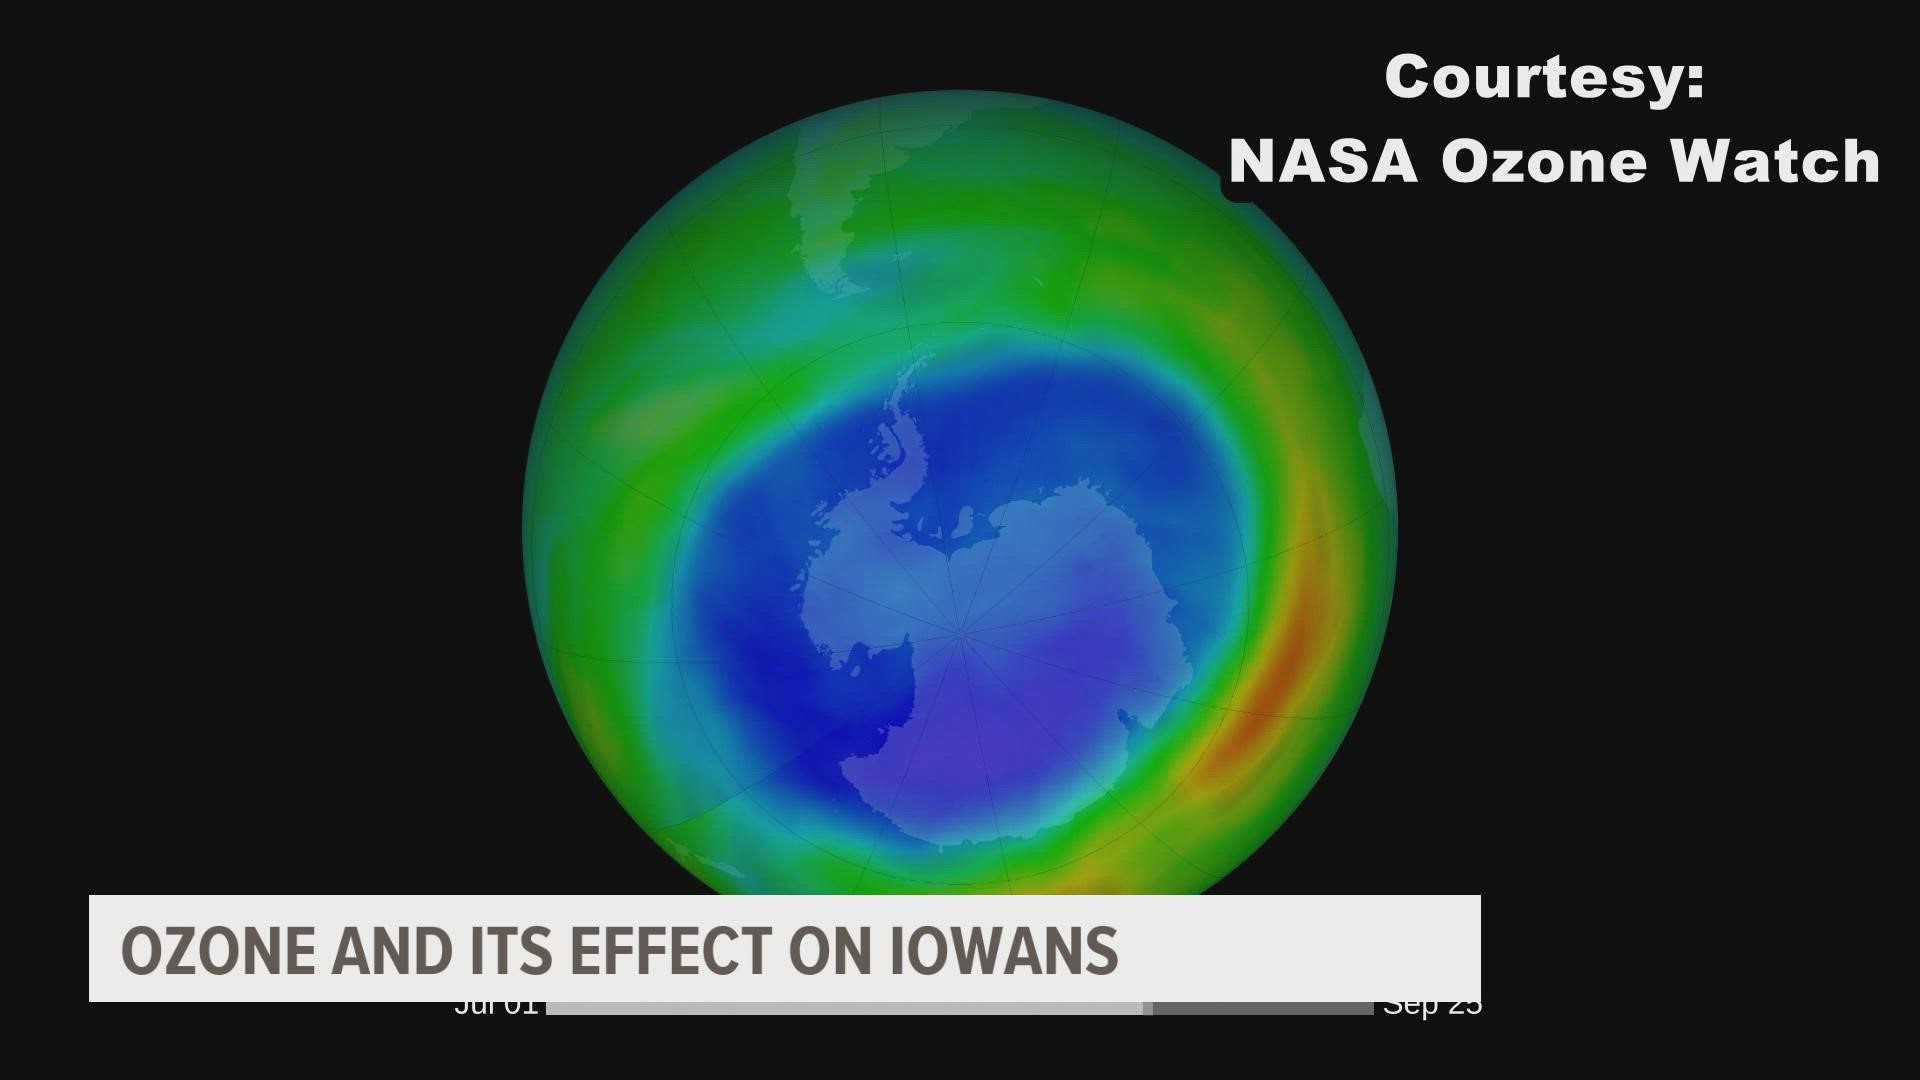 Iowa State Professor shares his insights on the effect the hole in the ozone layer could have on Iowans